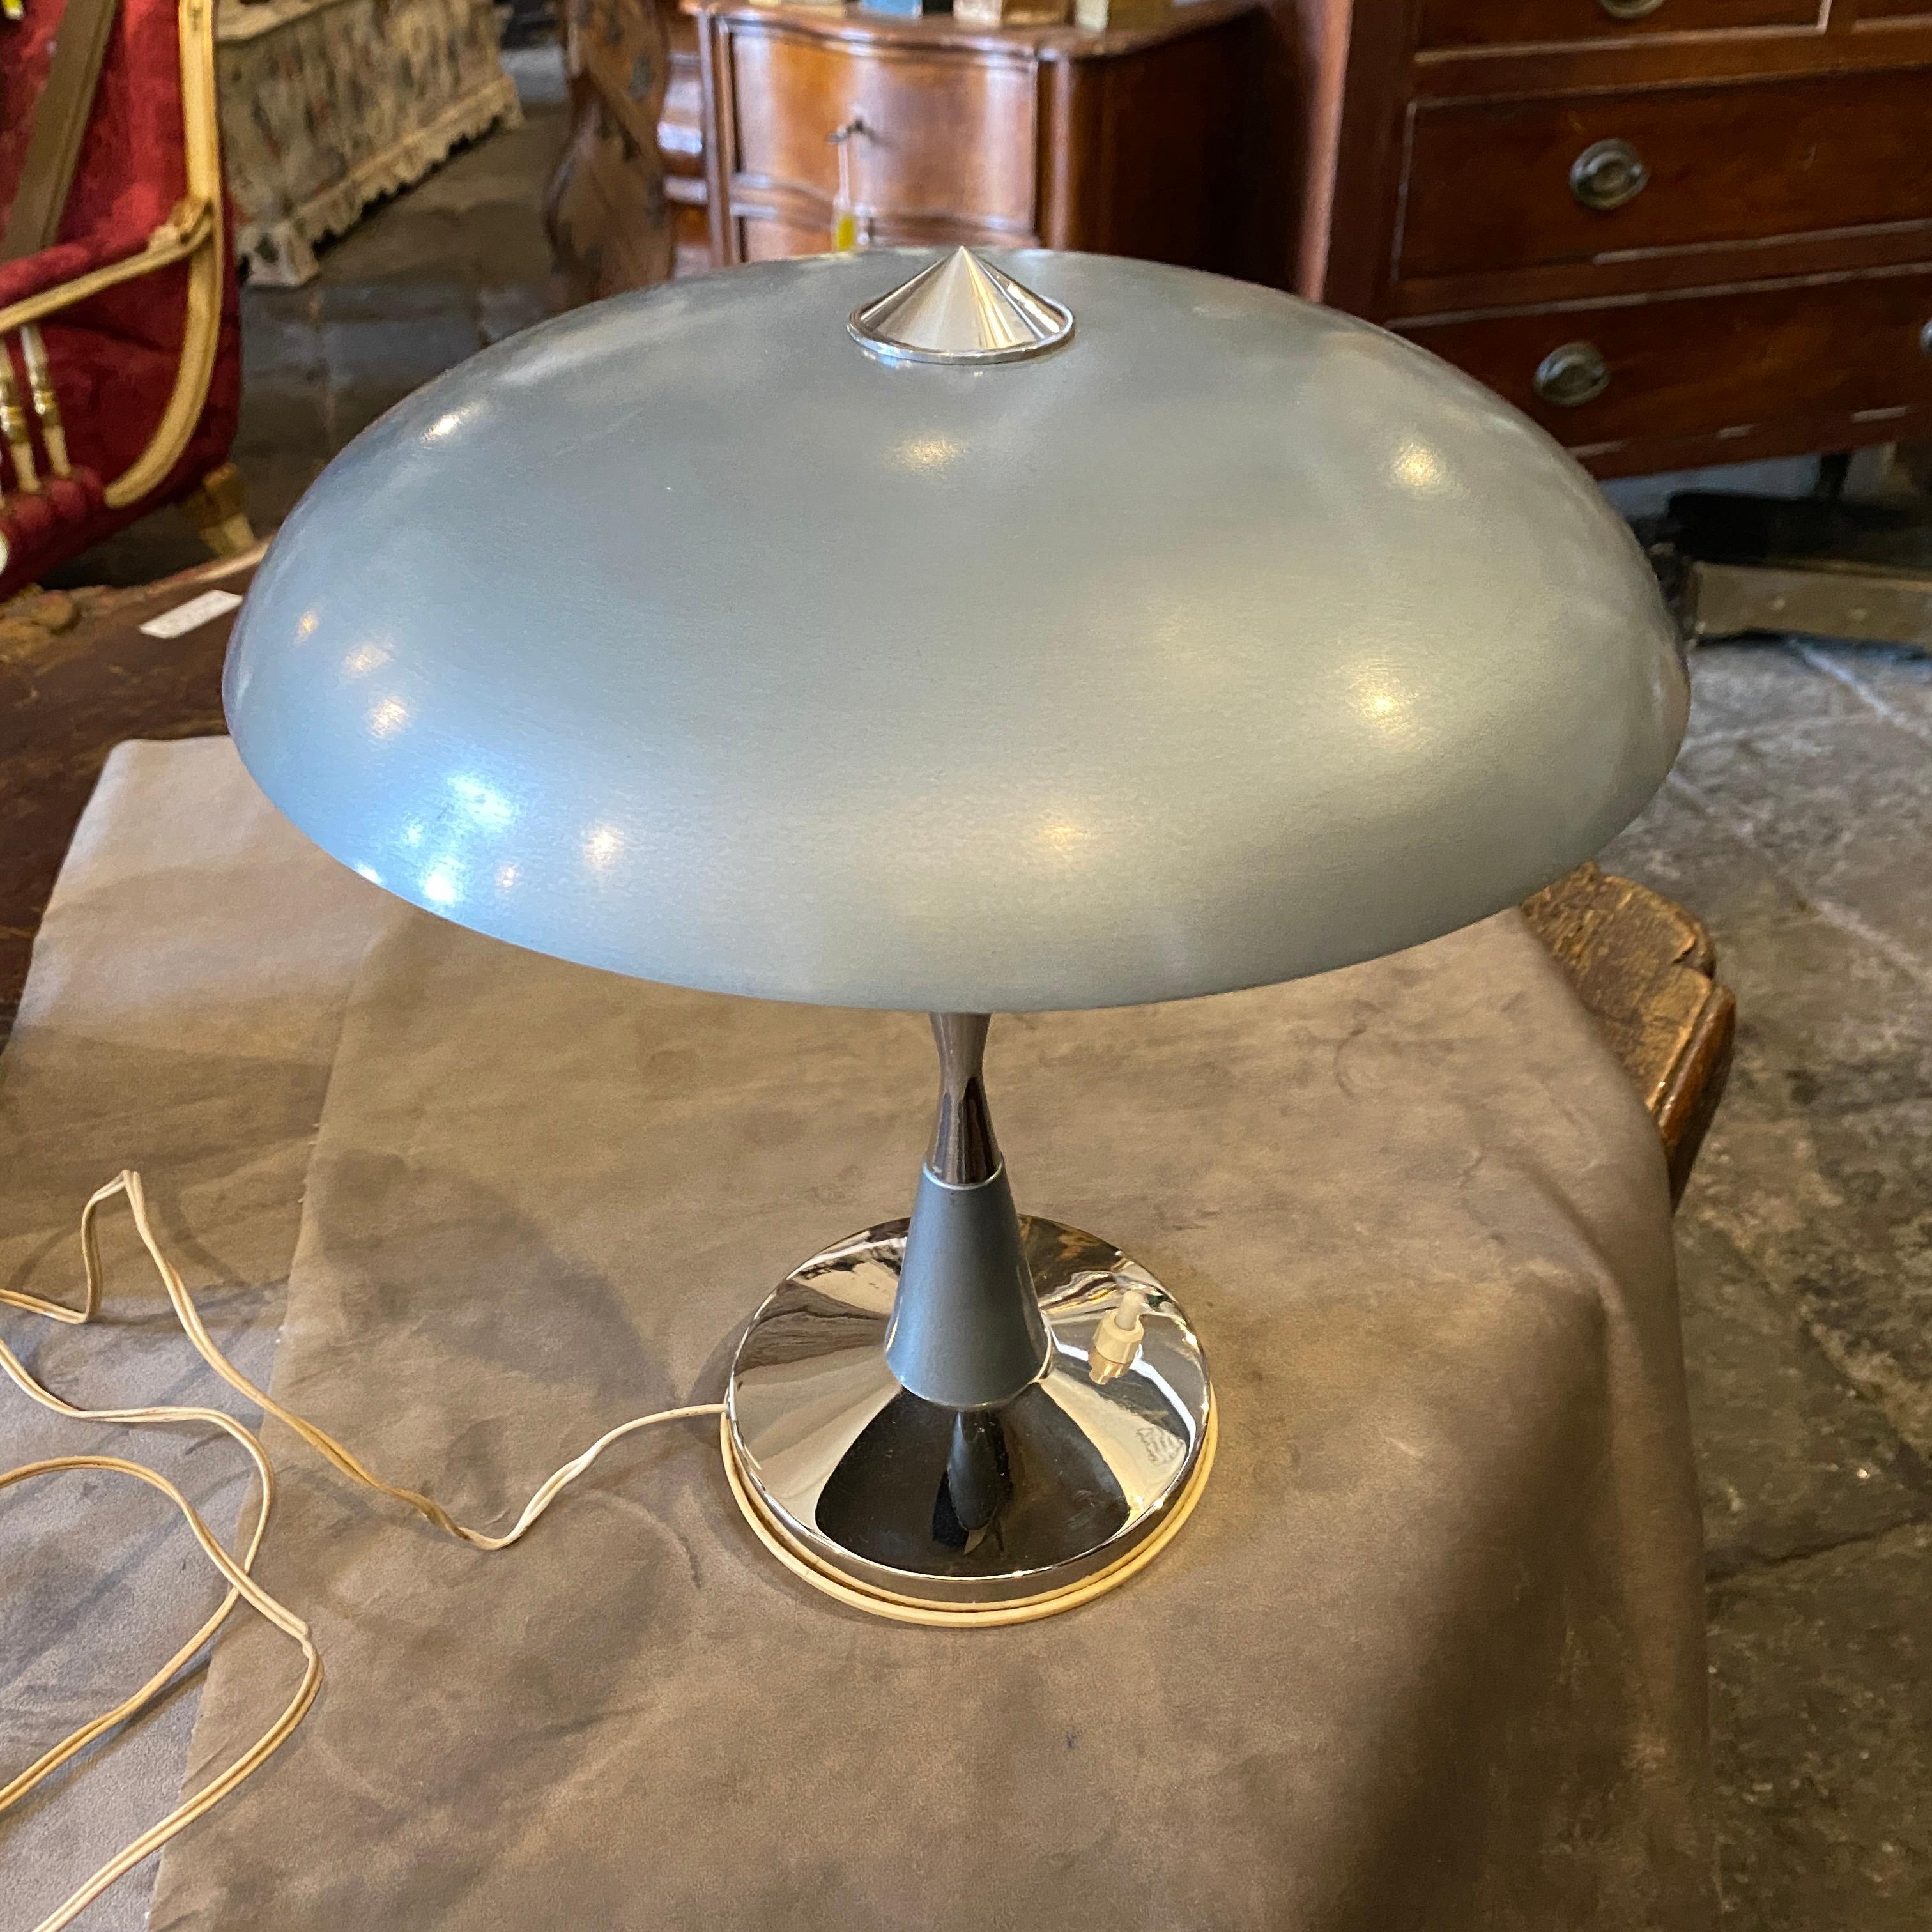 A stylish desk lamp made in Italy in the Thirties. It works 110-240 volts and needs two regular e14 bulbs. Metal and plastic of the base are in very good conditions.